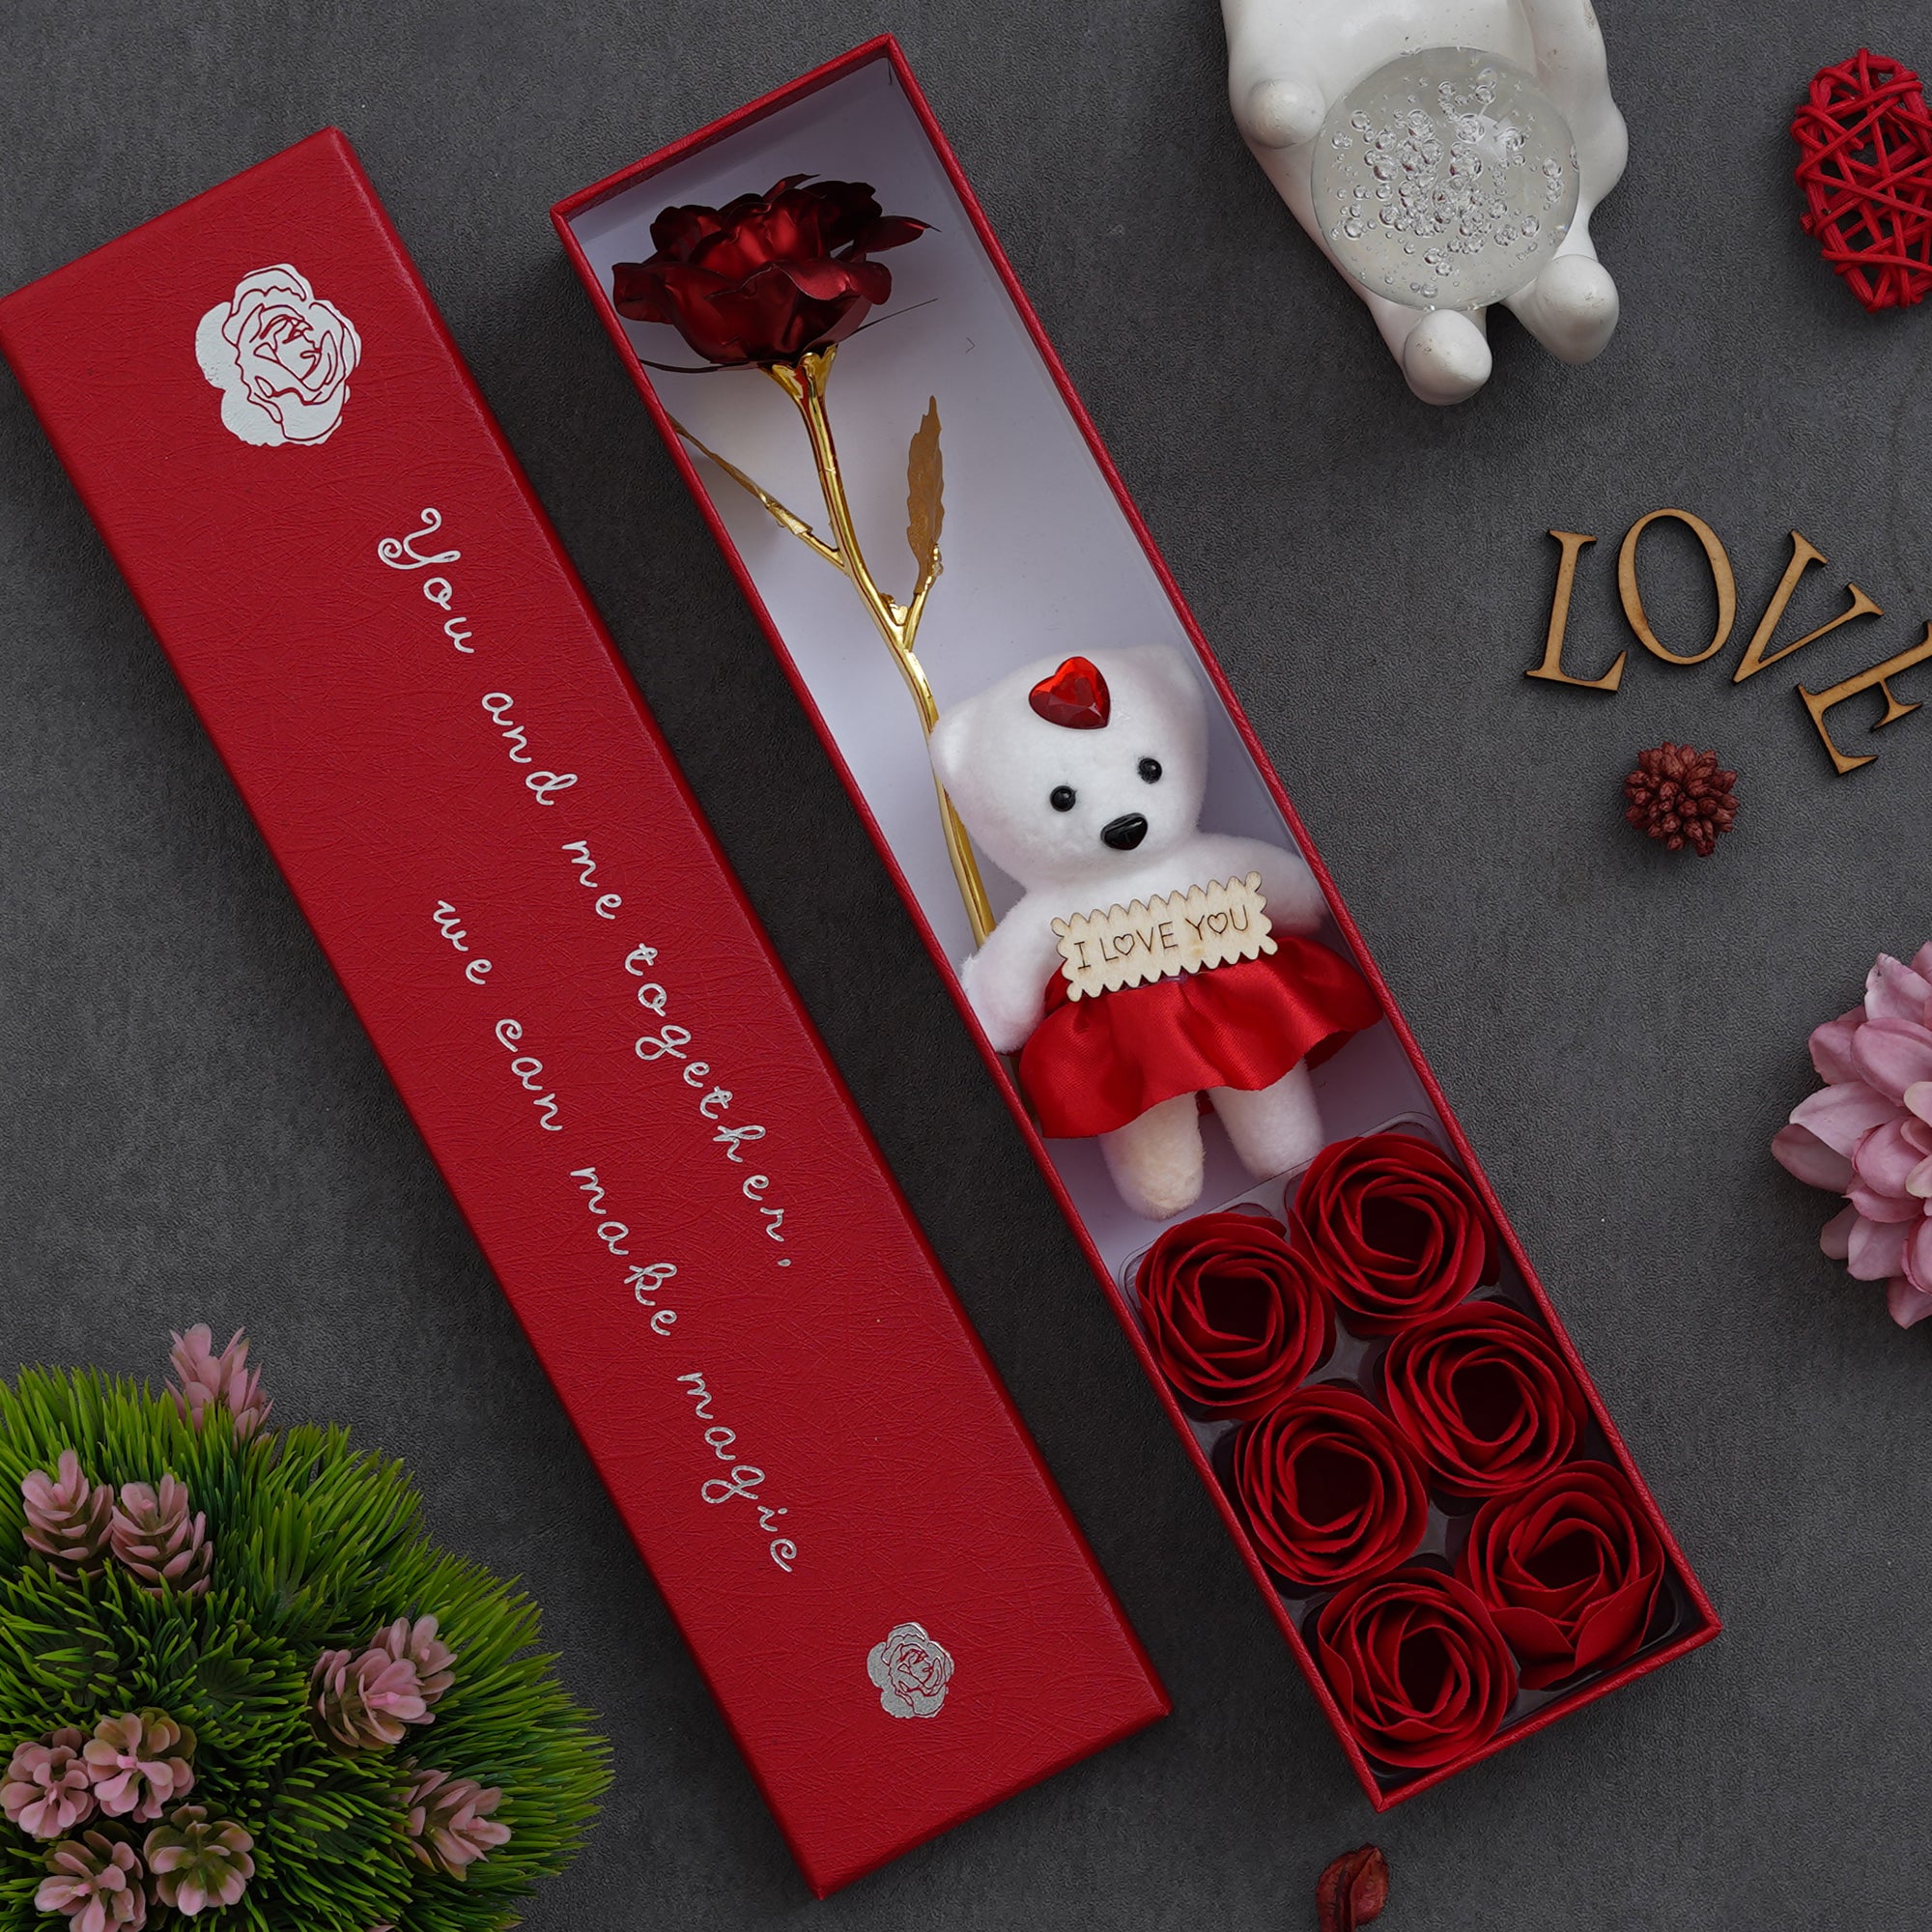 Valentine Combo of Pack of 8 Love Gift Cards, Red Gift Box with Teddy & Roses, "20 Reasons Why I Need You" Printed on Little Hearts Wooden Gift Set 3